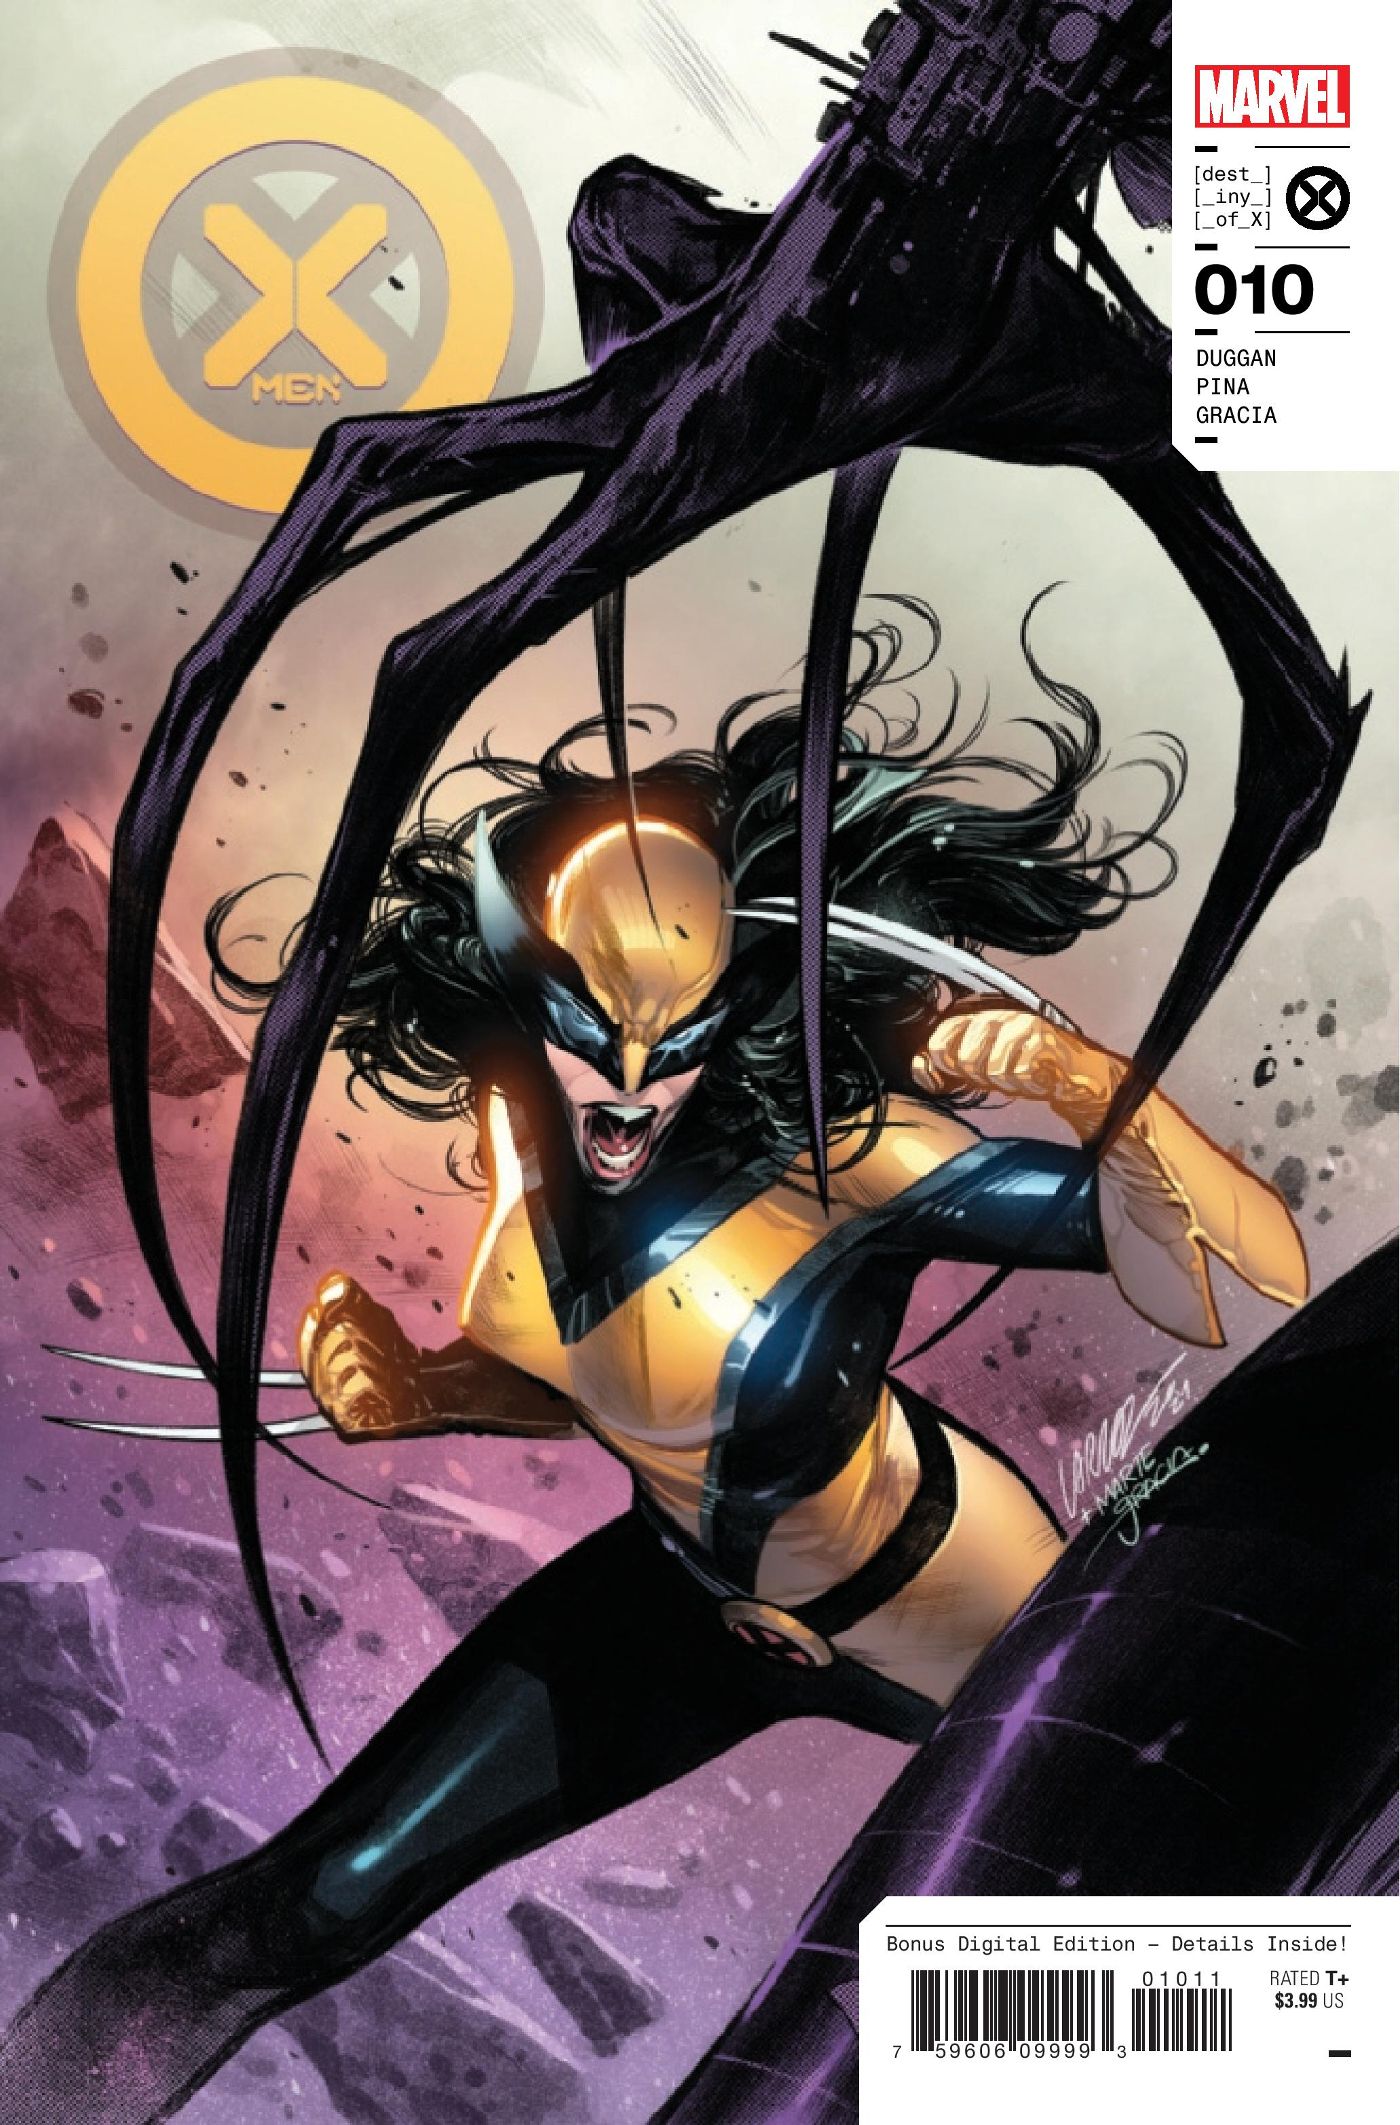 Wolverine is Getting a Rematch for One of Her Most Brutal Beatdowns